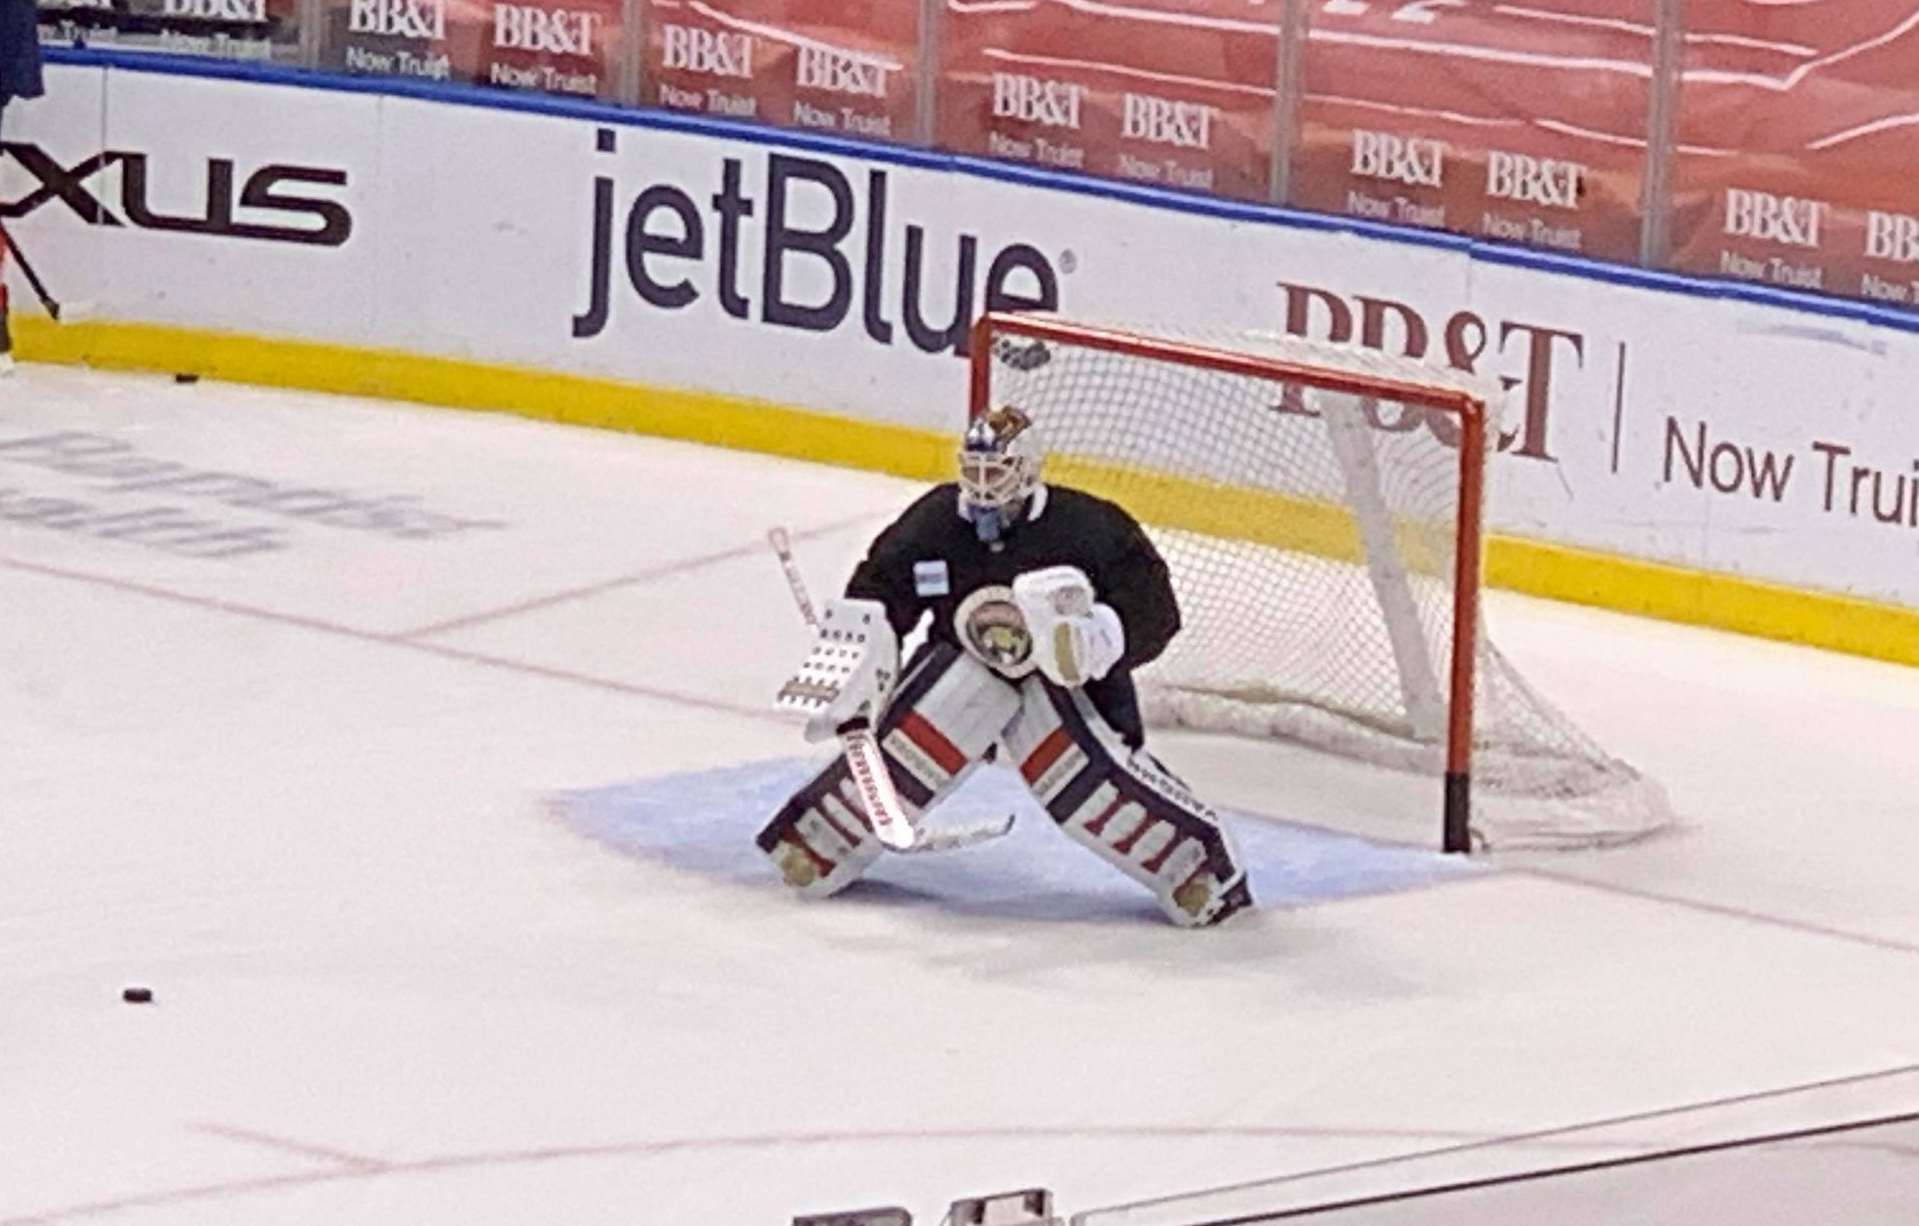 Florida Panthers goaltender Chris Driedger warms up before the